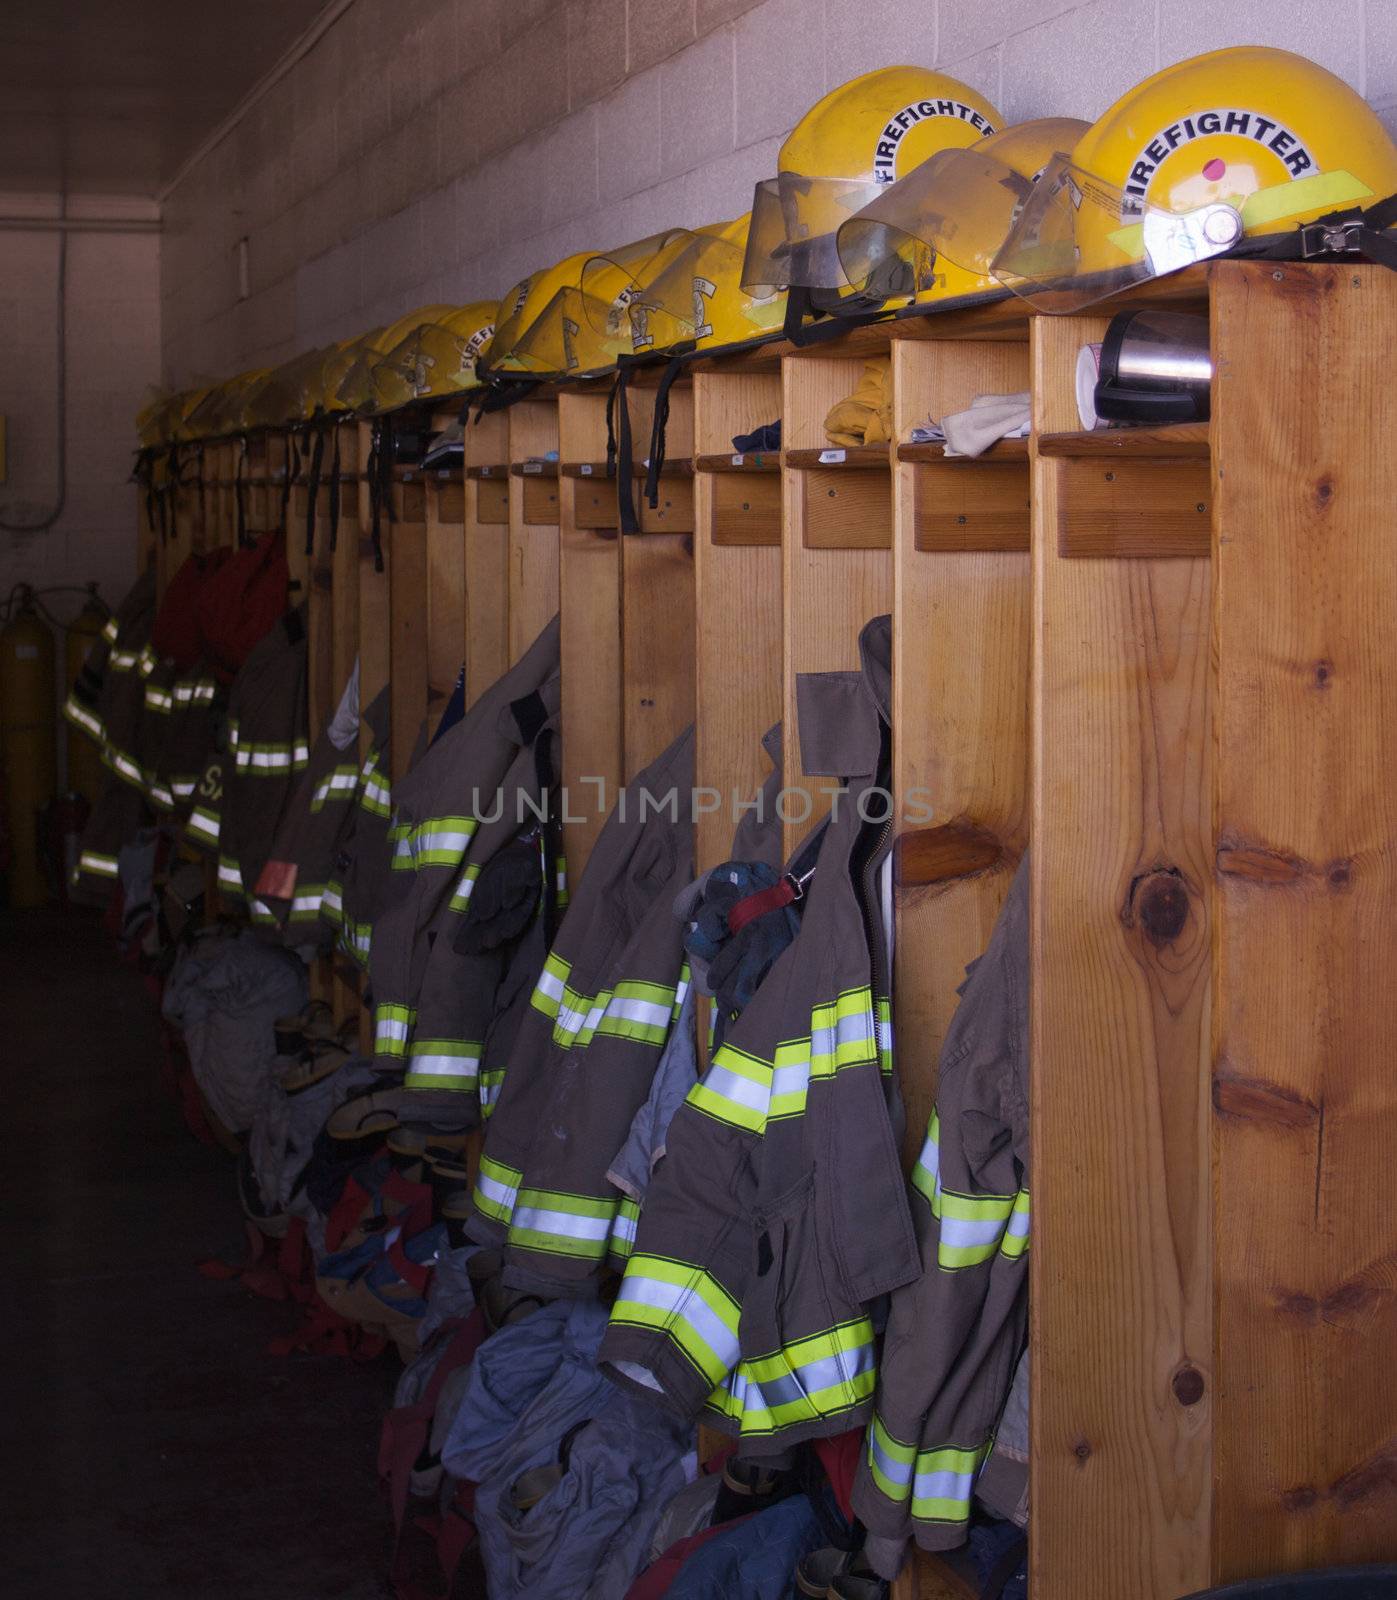 A row of lockers in a firehouse with jackets and helmets